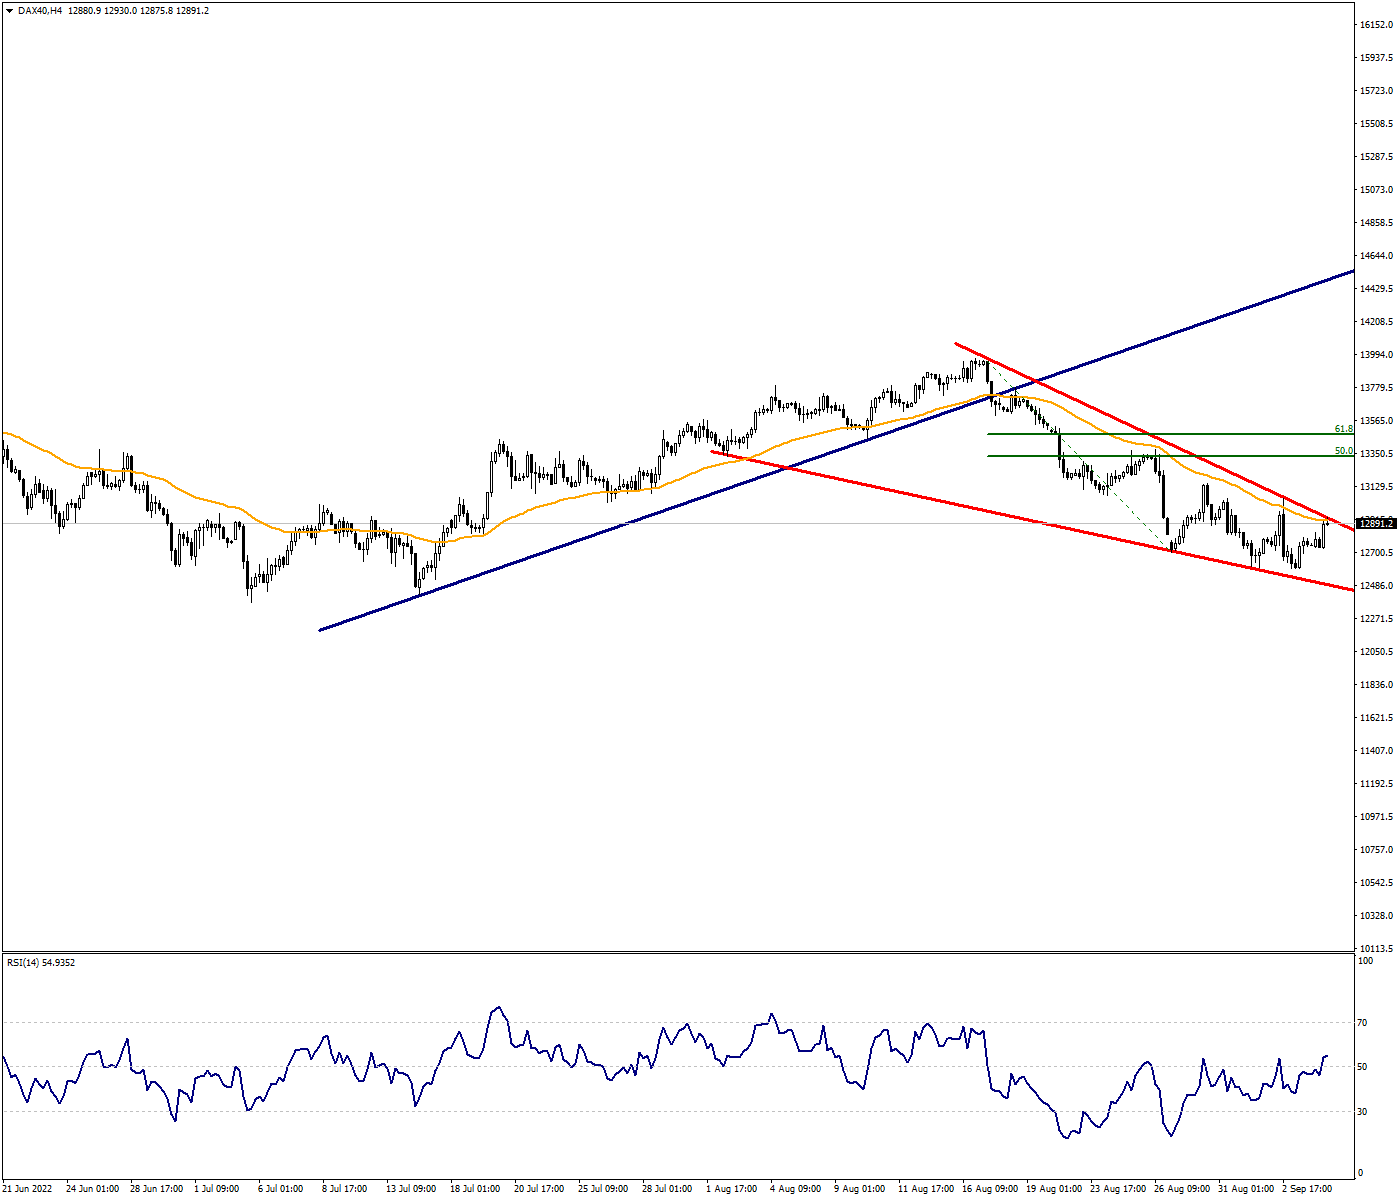 DAX40 May Turn to Recovery Path